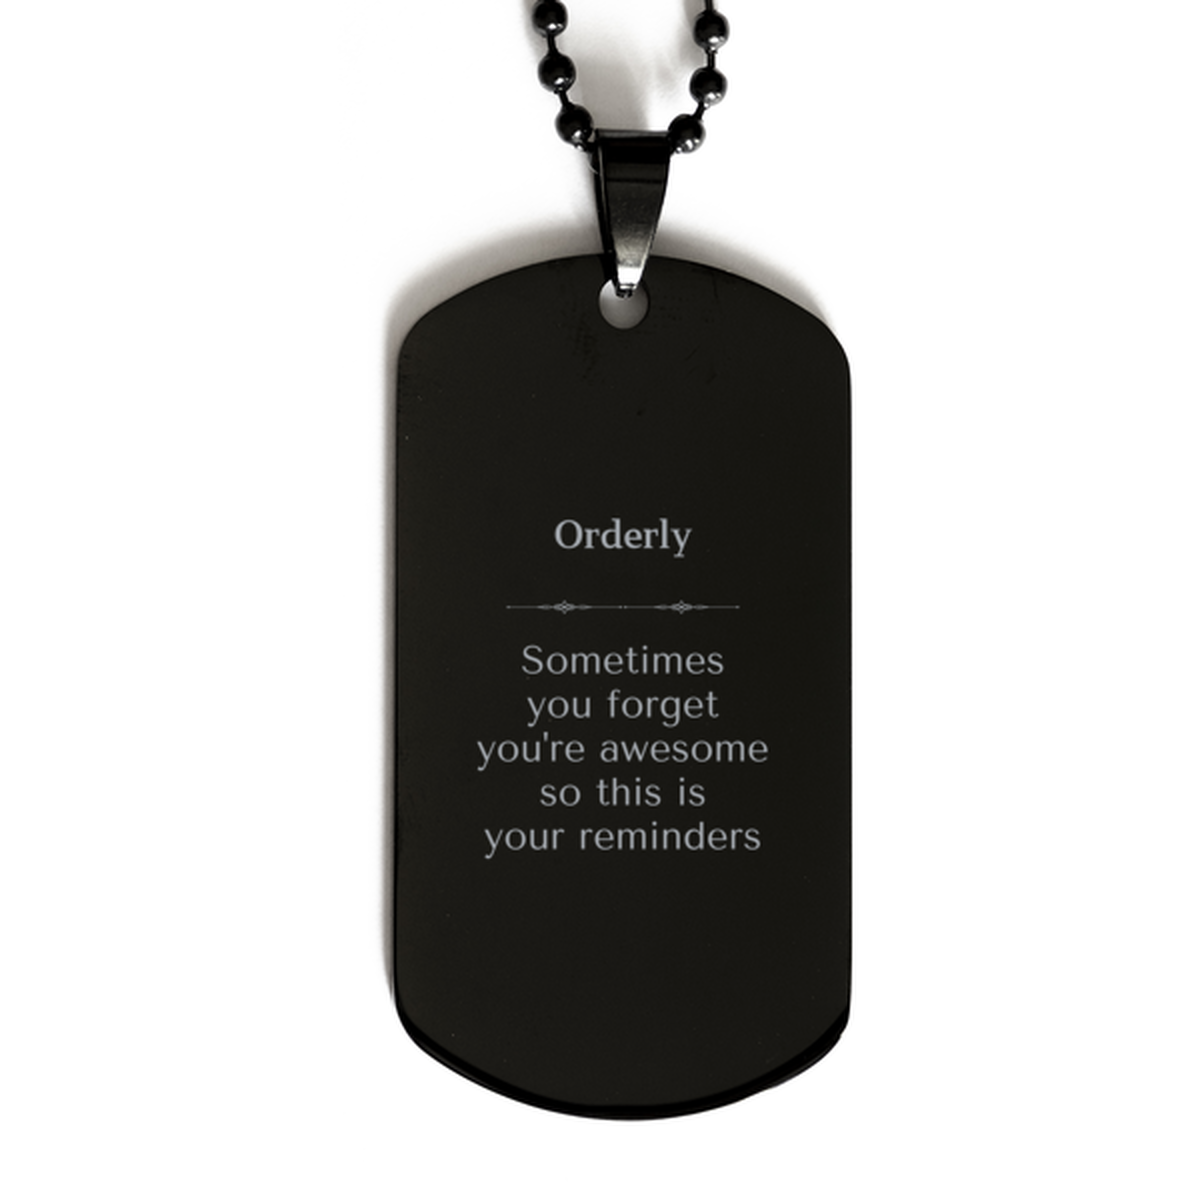 Sentimental Orderly Black Dog Tag, Orderly Sometimes you forget you're awesome so this is your reminders, Graduation Christmas Birthday Gifts for Orderly, Men, Women, Coworkers